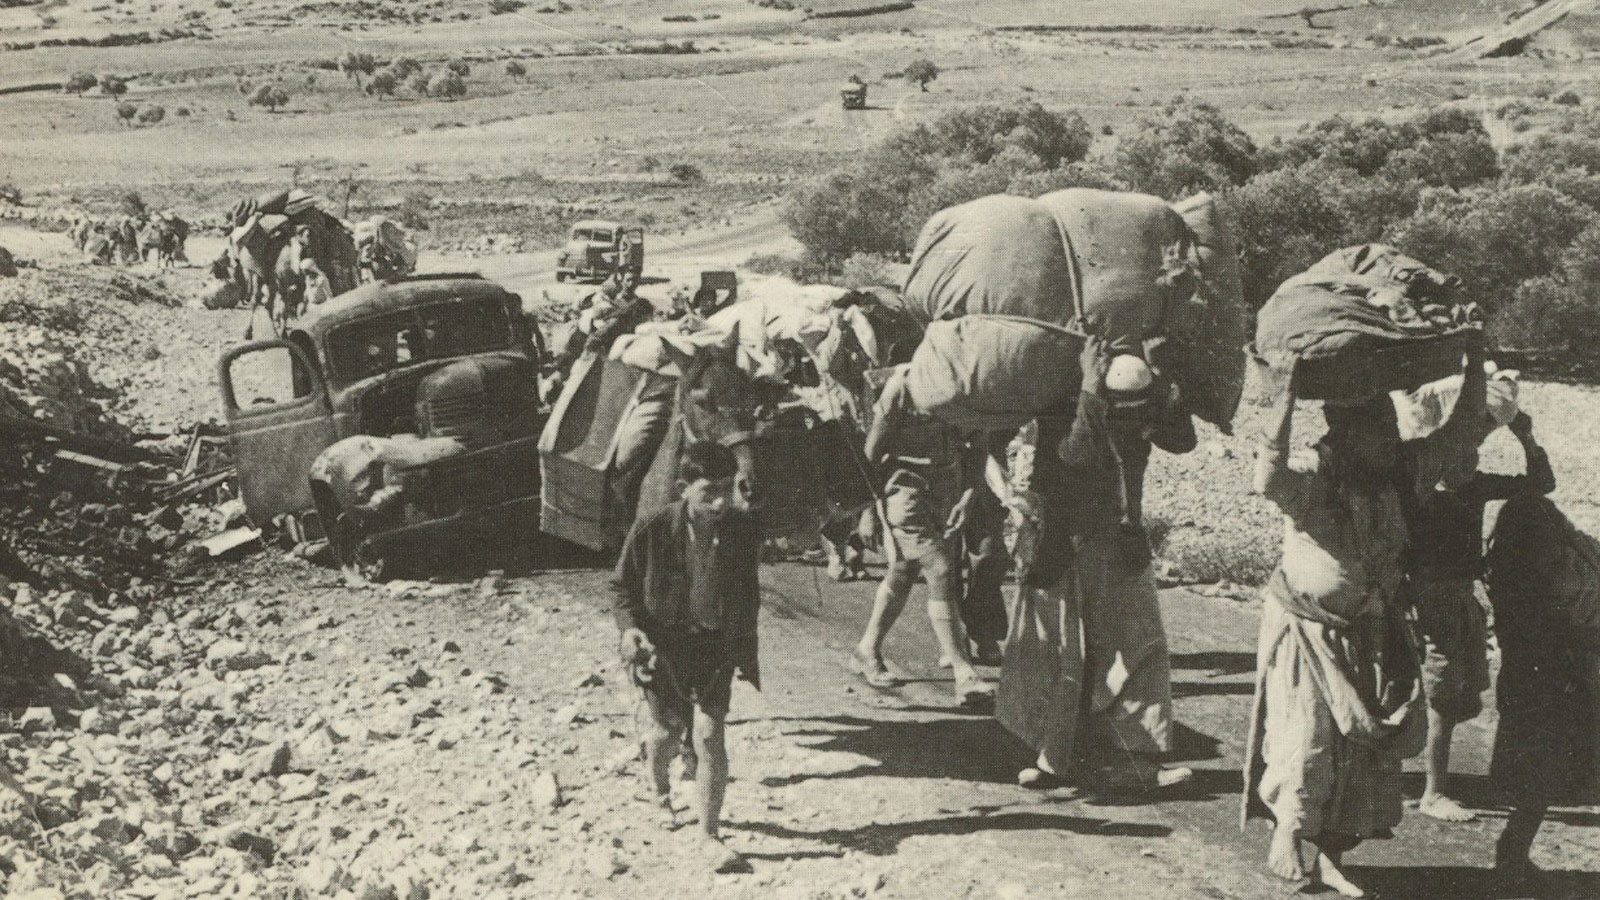 The displacement of Palestinians during the 1948 war, often referred to as the Nakba, is central in shaping some activists’ ideas of justice. 